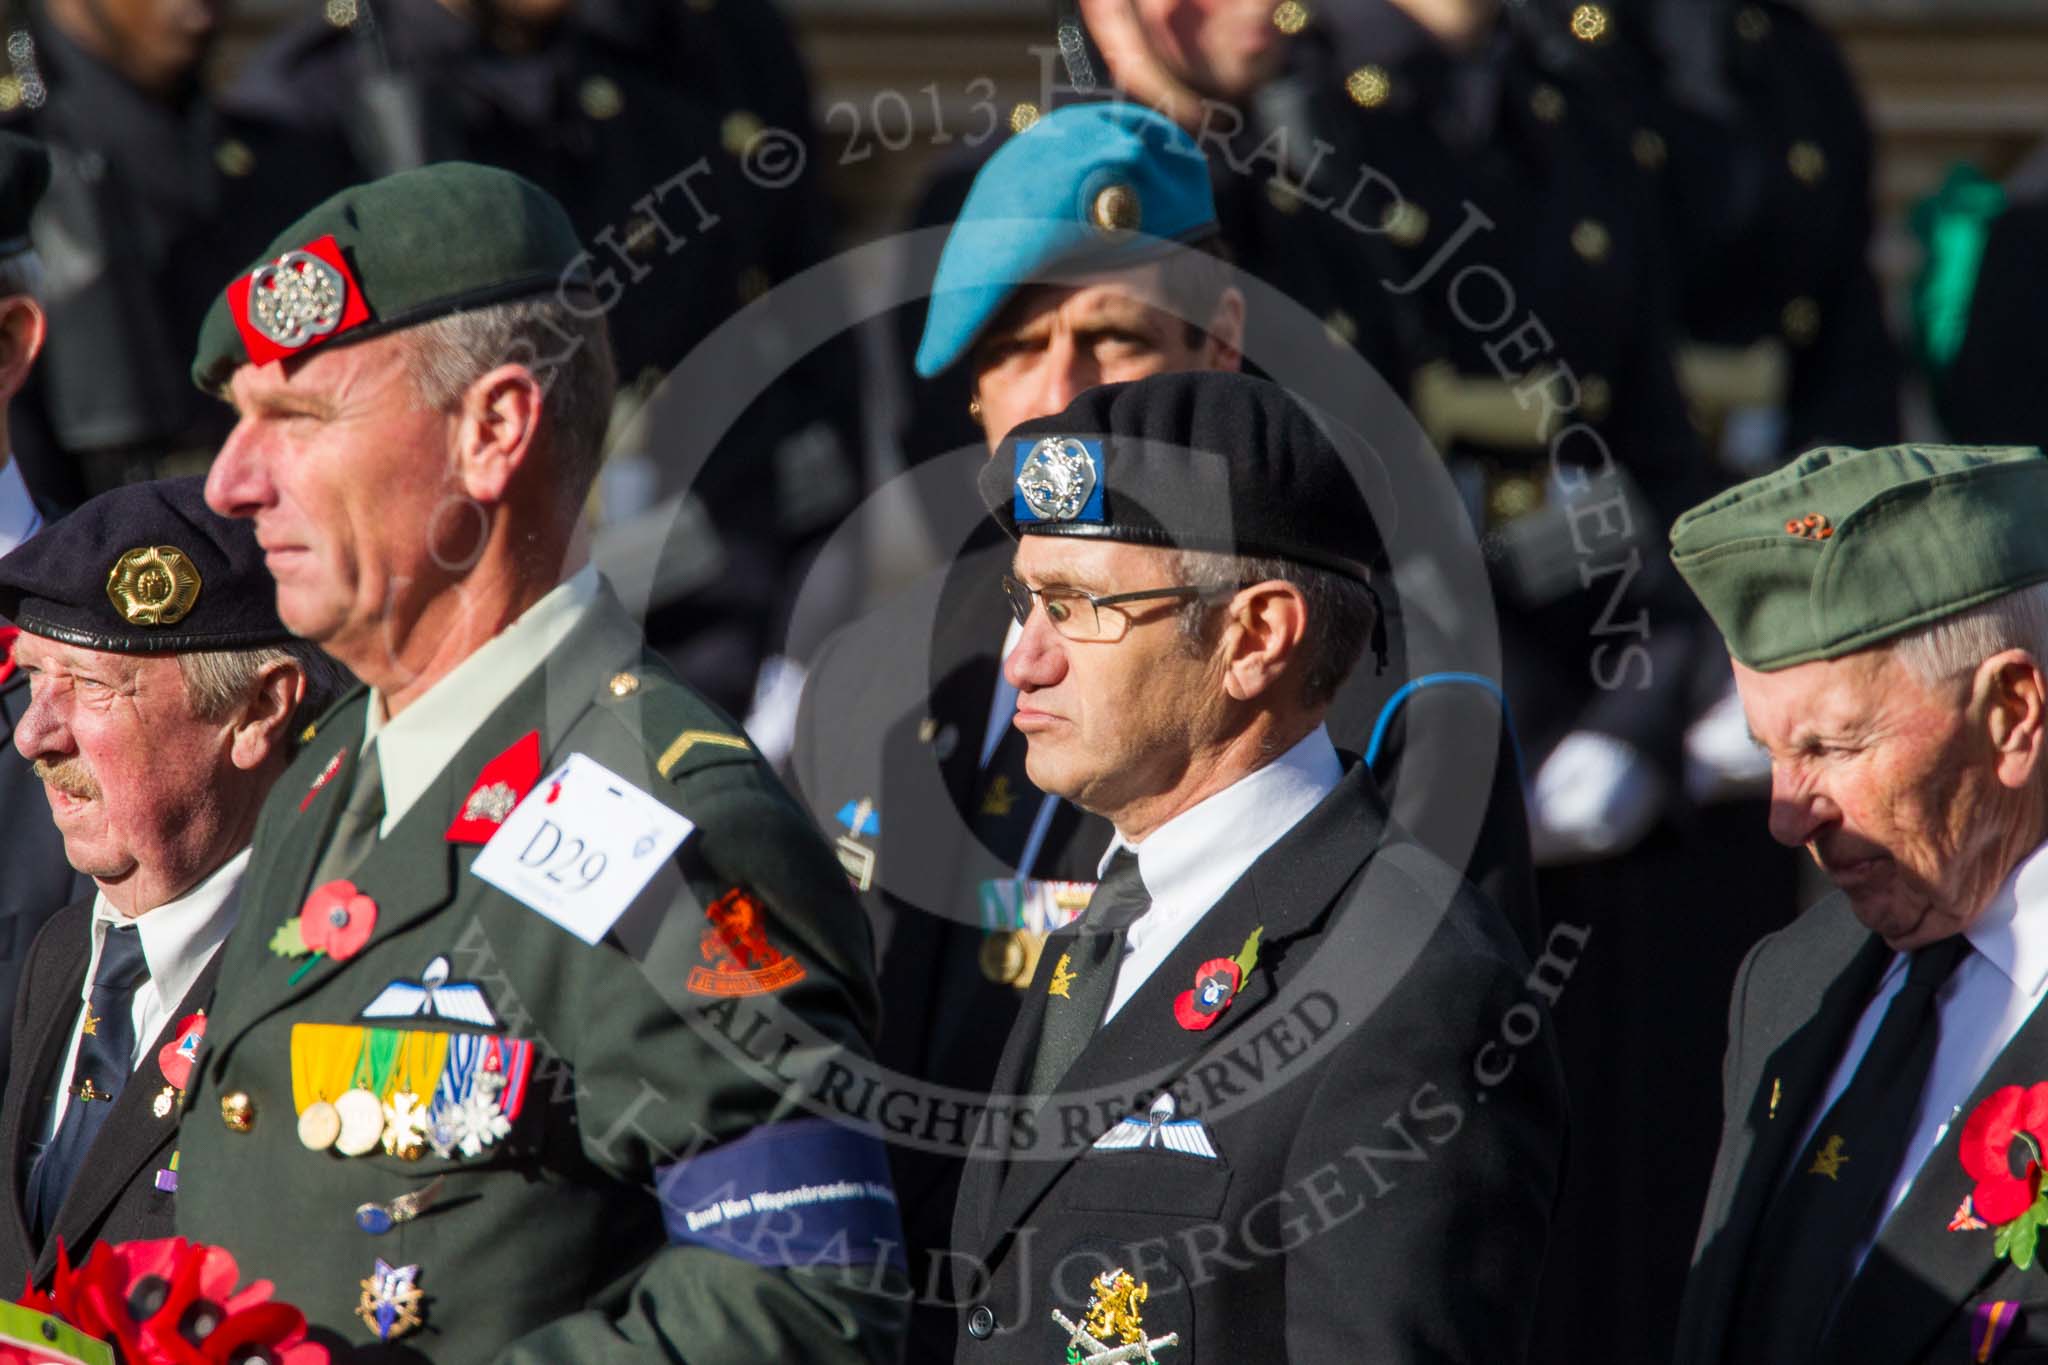 Remembrance Sunday at the Cenotaph in London 2014: Group D29 - Bond Van Wapenbroeders.
Press stand opposite the Foreign Office building, Whitehall, London SW1,
London,
Greater London,
United Kingdom,
on 09 November 2014 at 11:48, image #513